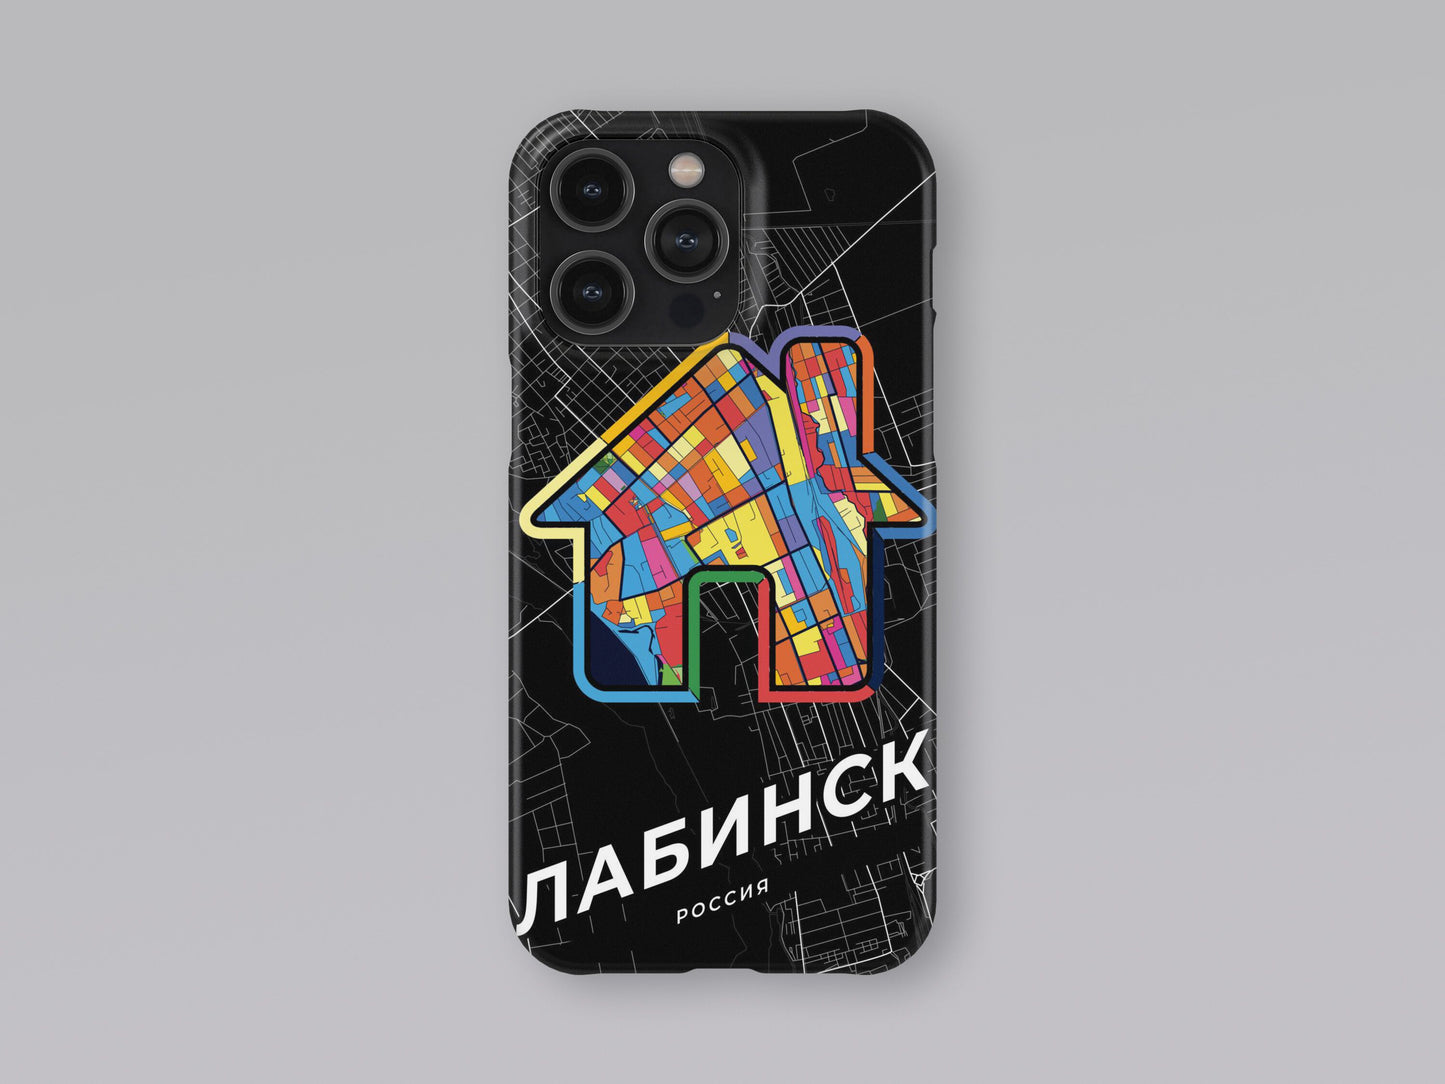 Labinsk Russia slim phone case with colorful icon. Birthday, wedding or housewarming gift. Couple match cases. 3